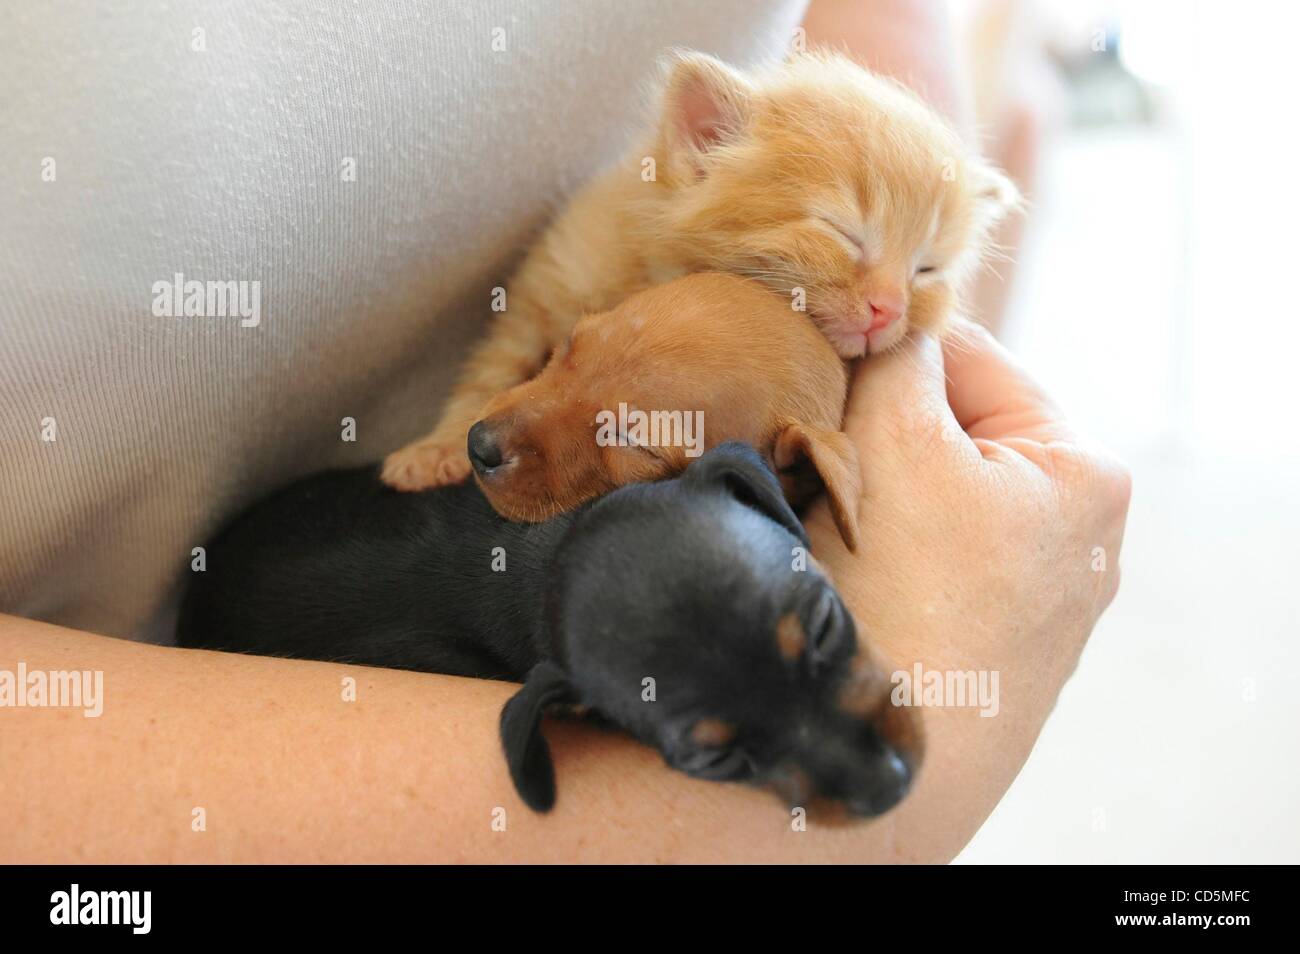 Aug 22, 2008 - Norco, California, U.S. - Dog owner SHERRY HAYNES holds two baby miniature pinschers and a 3 week old kitten. Jasmine, a miniature pinscher, gave birth to four puppies but was also the proud mother of four kittens after the mother cat failed to return and care for her young. The owner Stock Photo